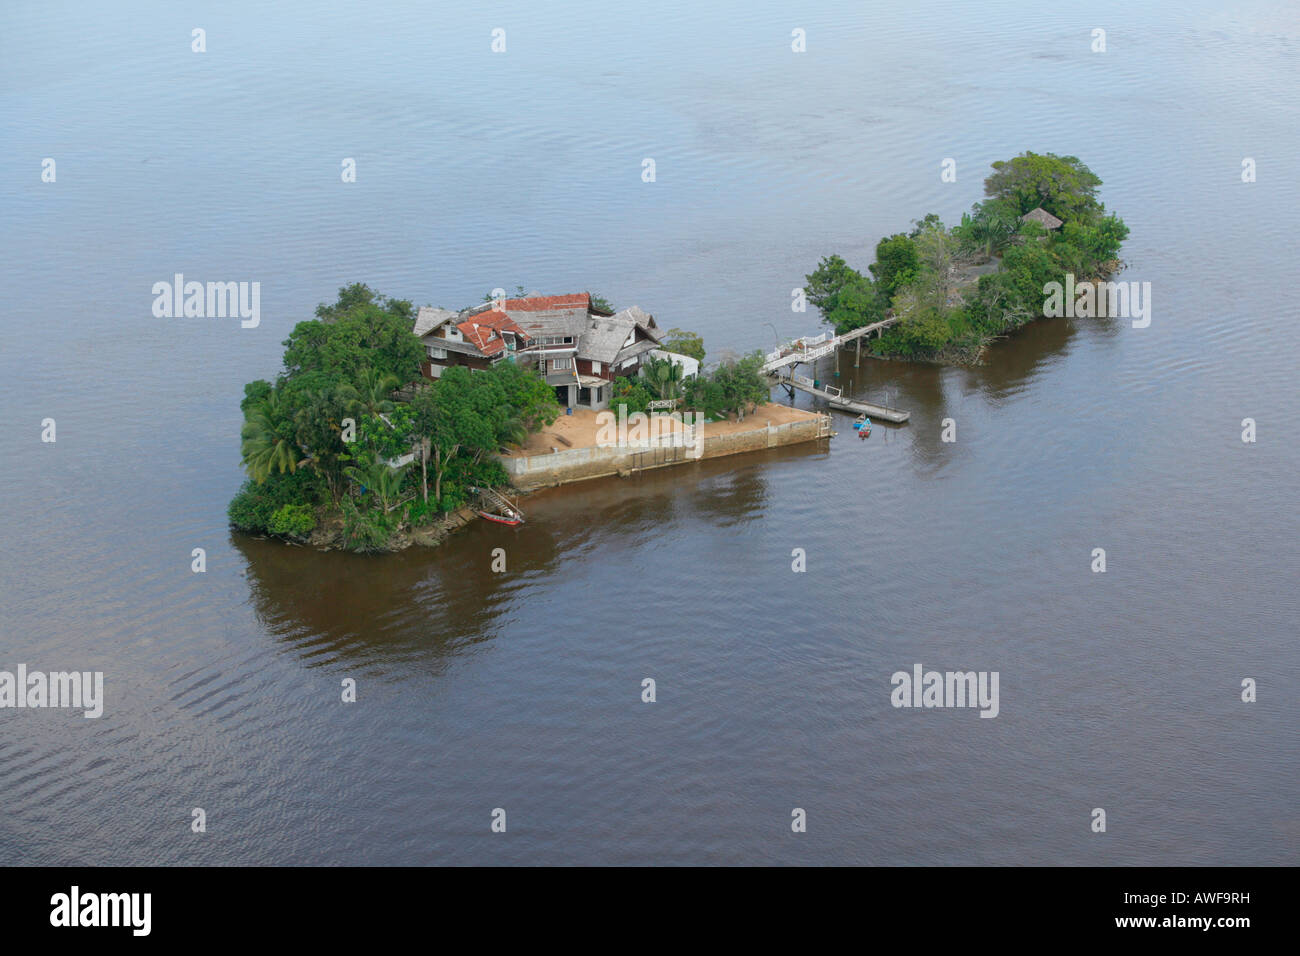 Aerial view of a house built on an island in Demerara River, Guyana, South America Stock Photo